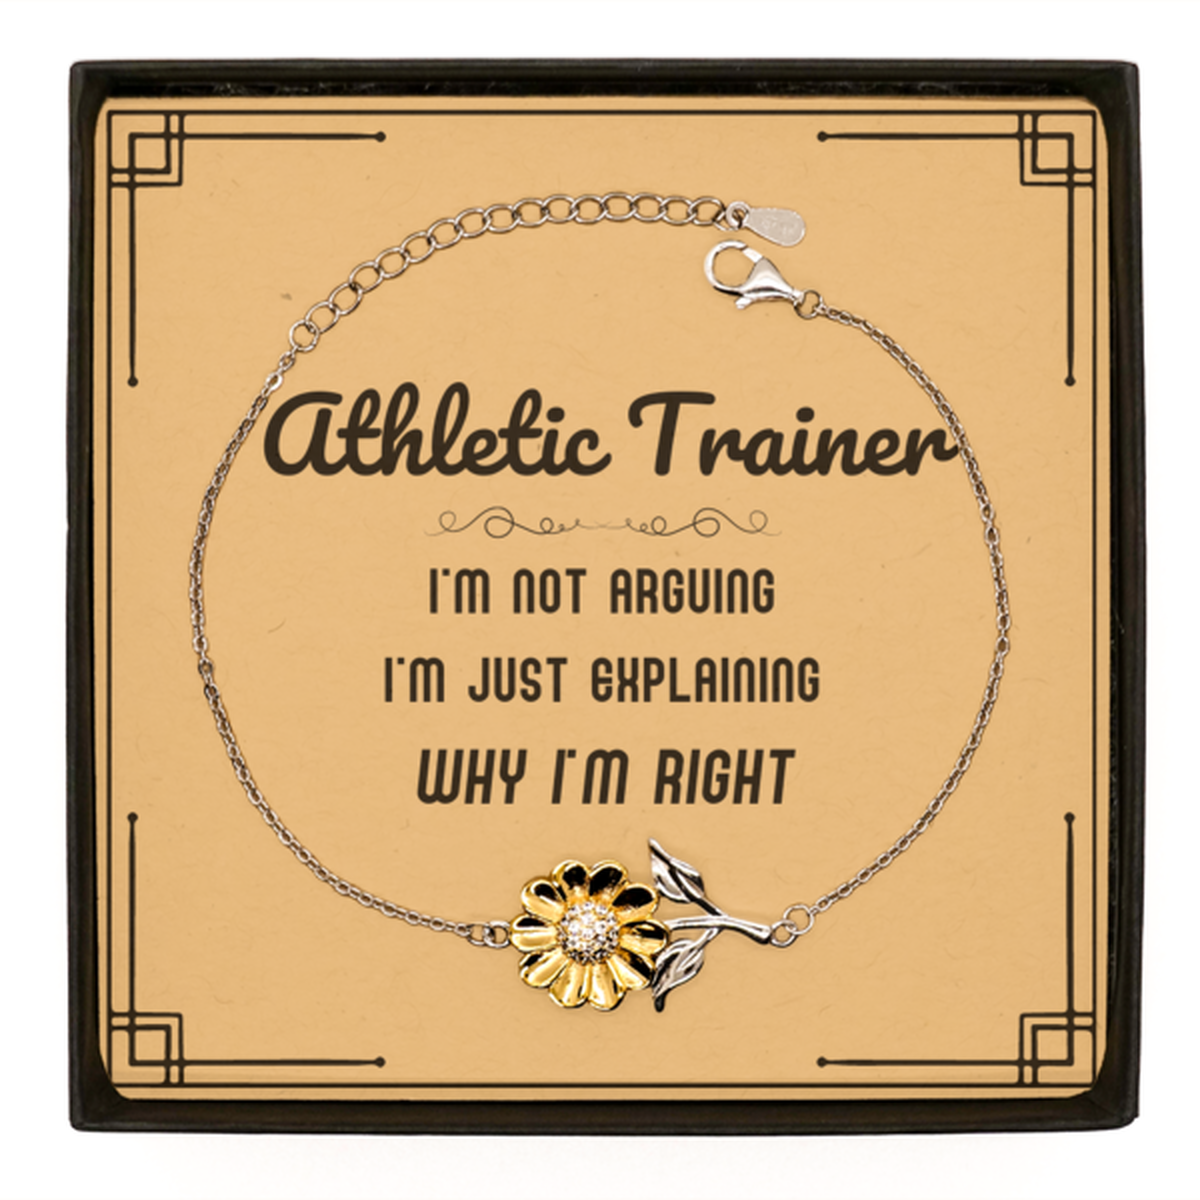 Athletic Trainer I'm not Arguing. I'm Just Explaining Why I'm RIGHT Sunflower Bracelet, Funny Saying Quote Athletic Trainer Gifts For Athletic Trainer Message Card Graduation Birthday Christmas Gifts for Men Women Coworker